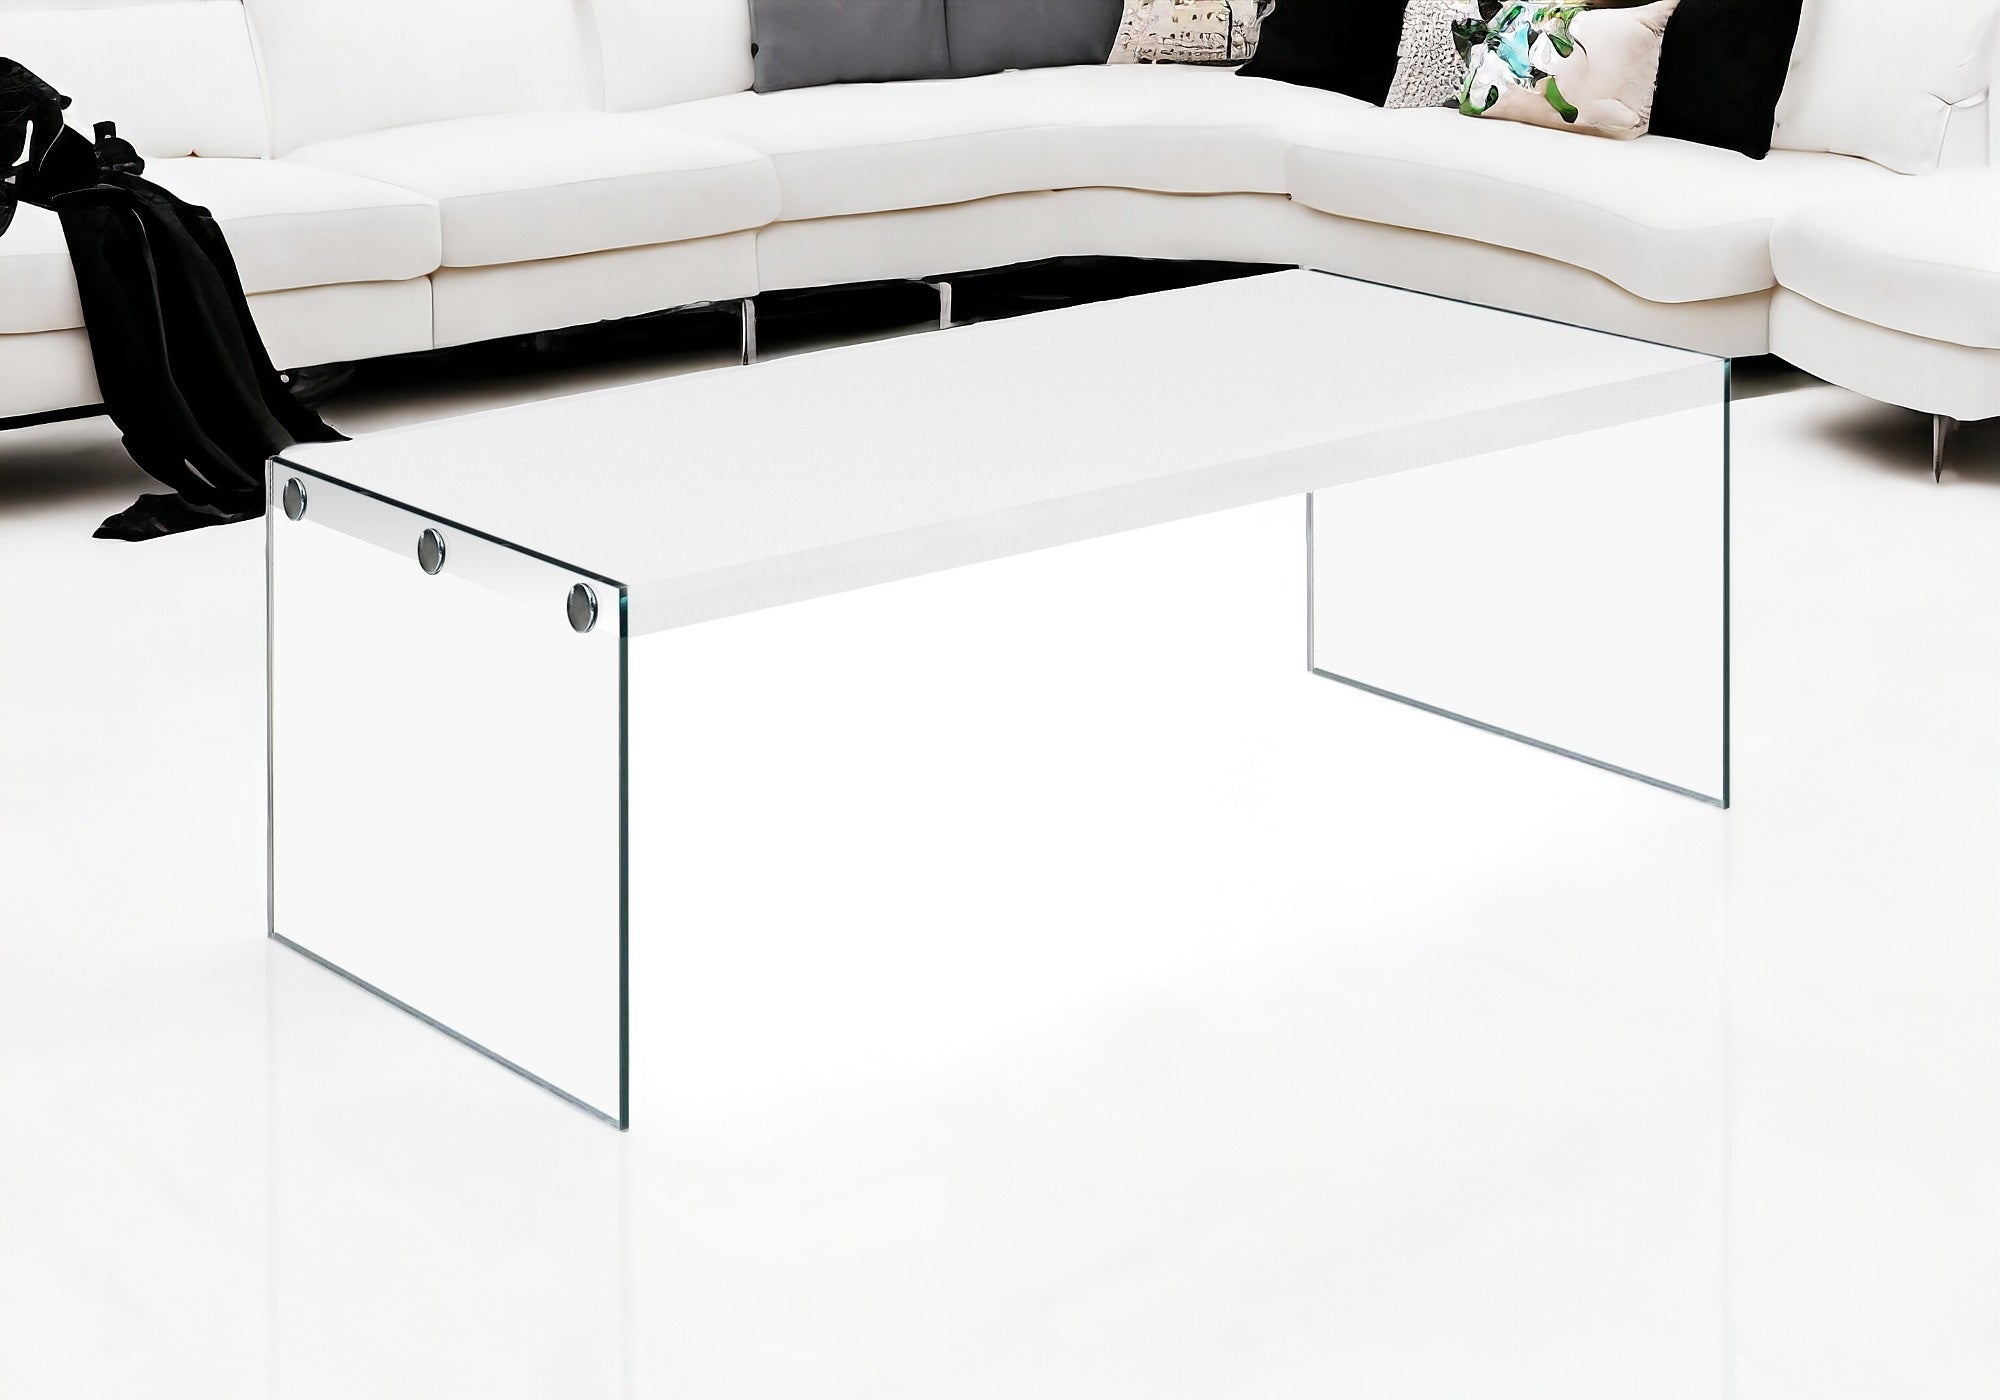 44" Gray And Clear Glass Coffee Table